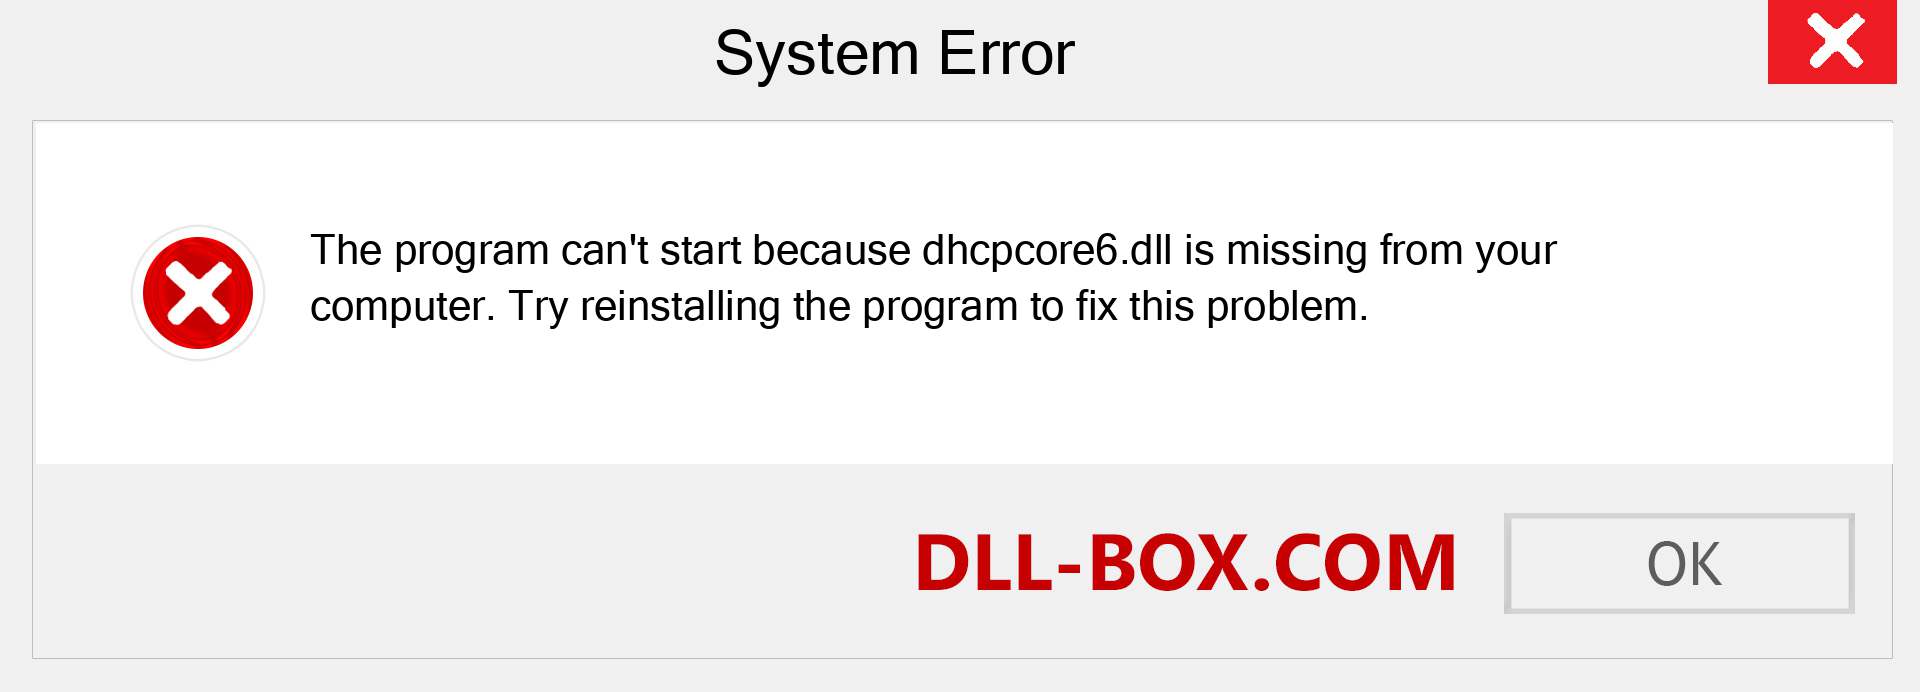  dhcpcore6.dll file is missing?. Download for Windows 7, 8, 10 - Fix  dhcpcore6 dll Missing Error on Windows, photos, images